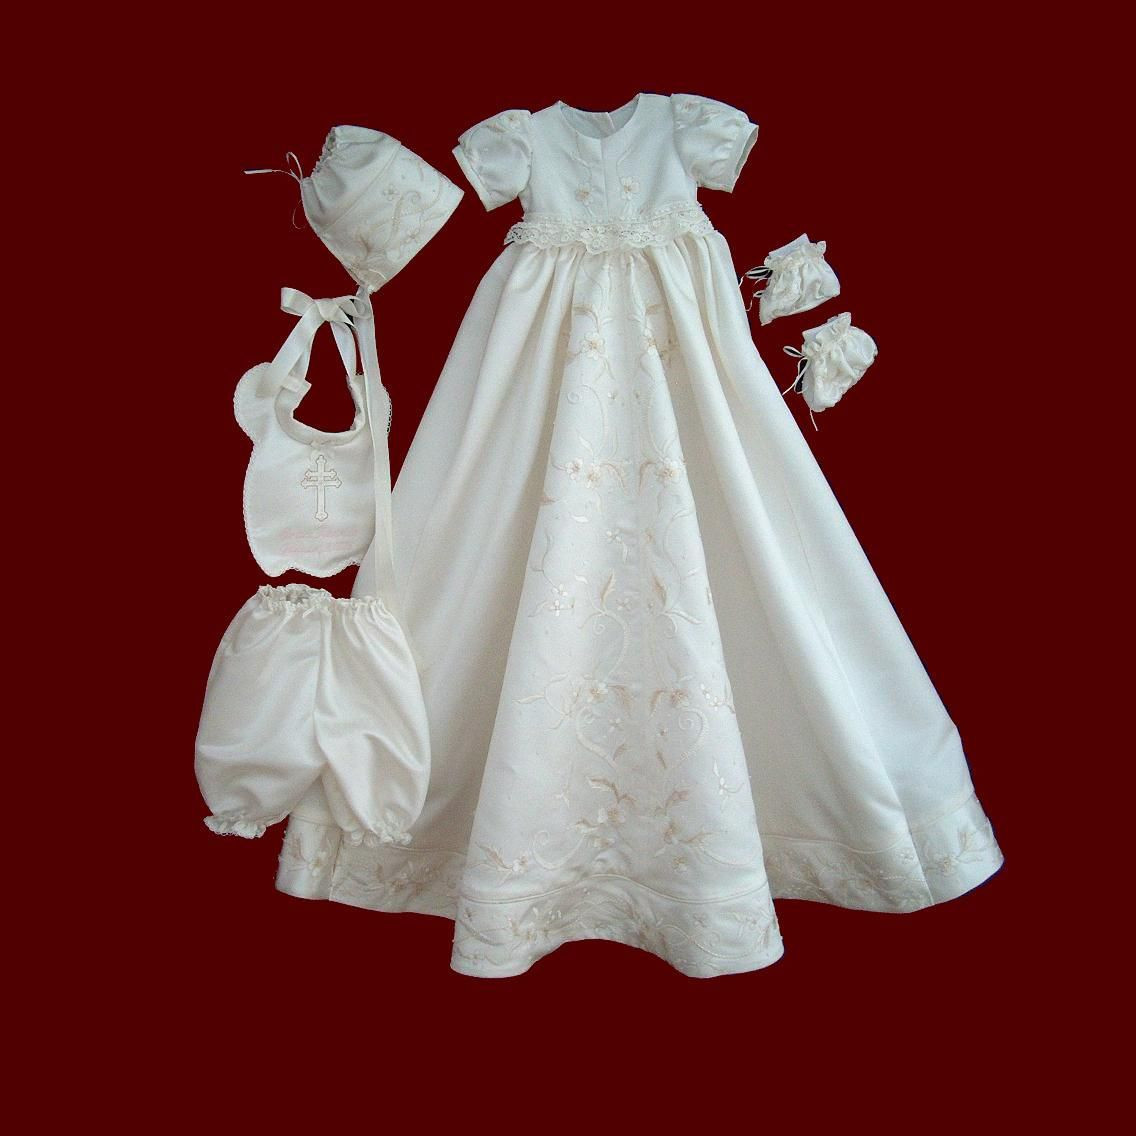 Christening Gown From Wedding Dress
 Christening gown made from your wedding dress how